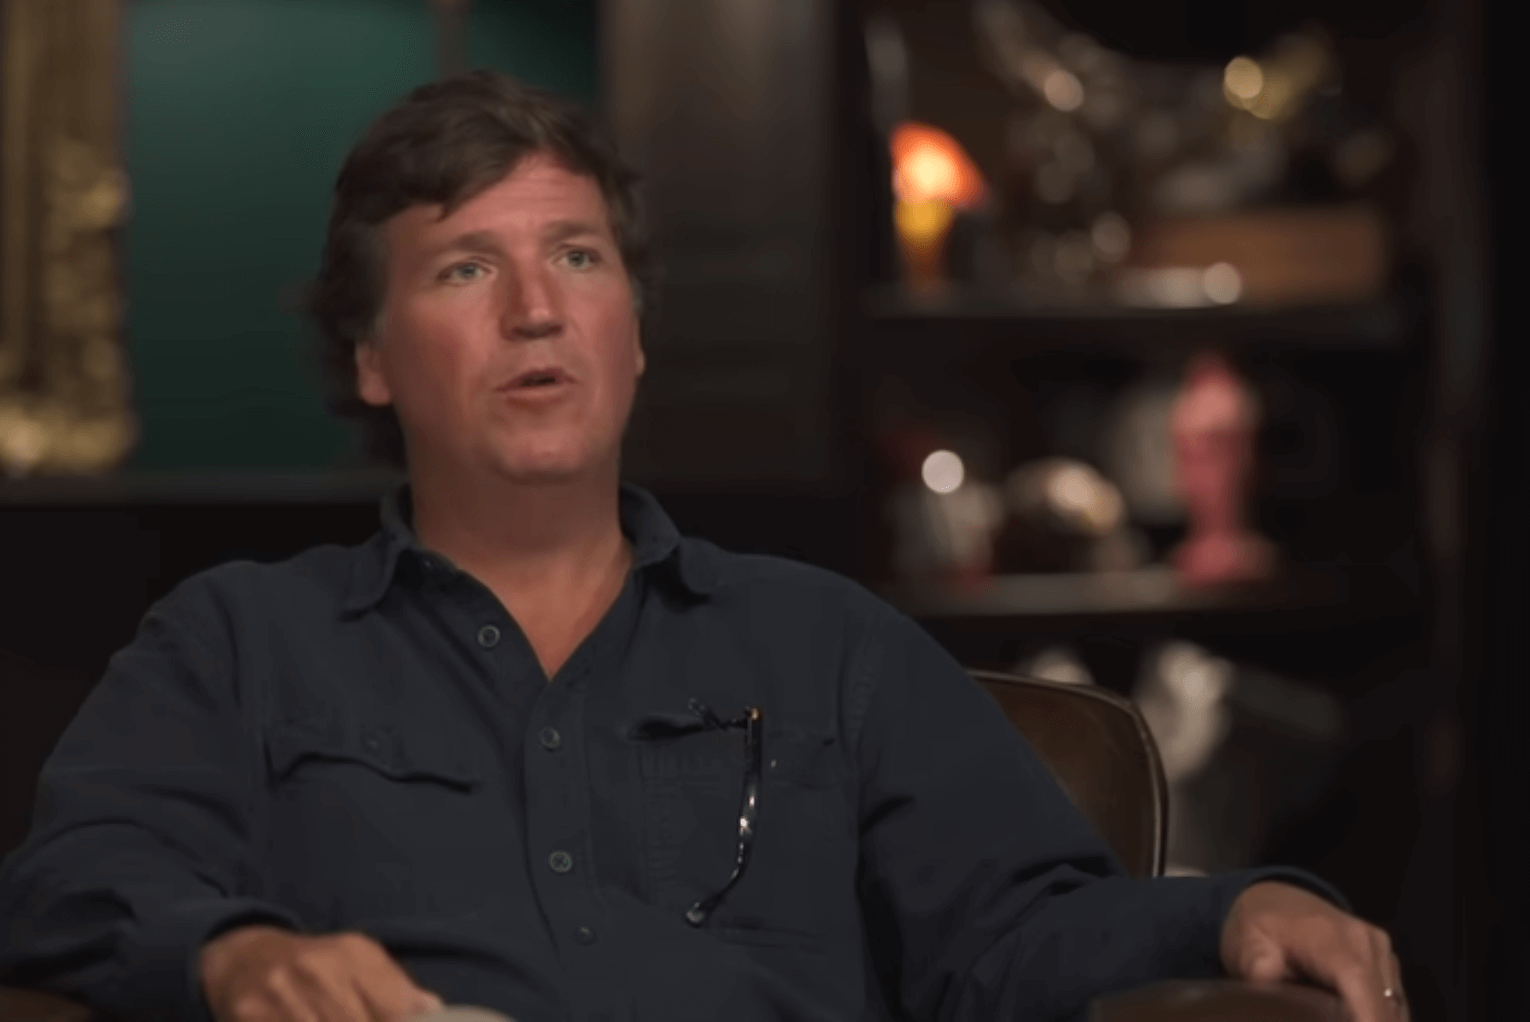 Tucker Carlson: The Spiritual Realm is Coming to Life in America Today